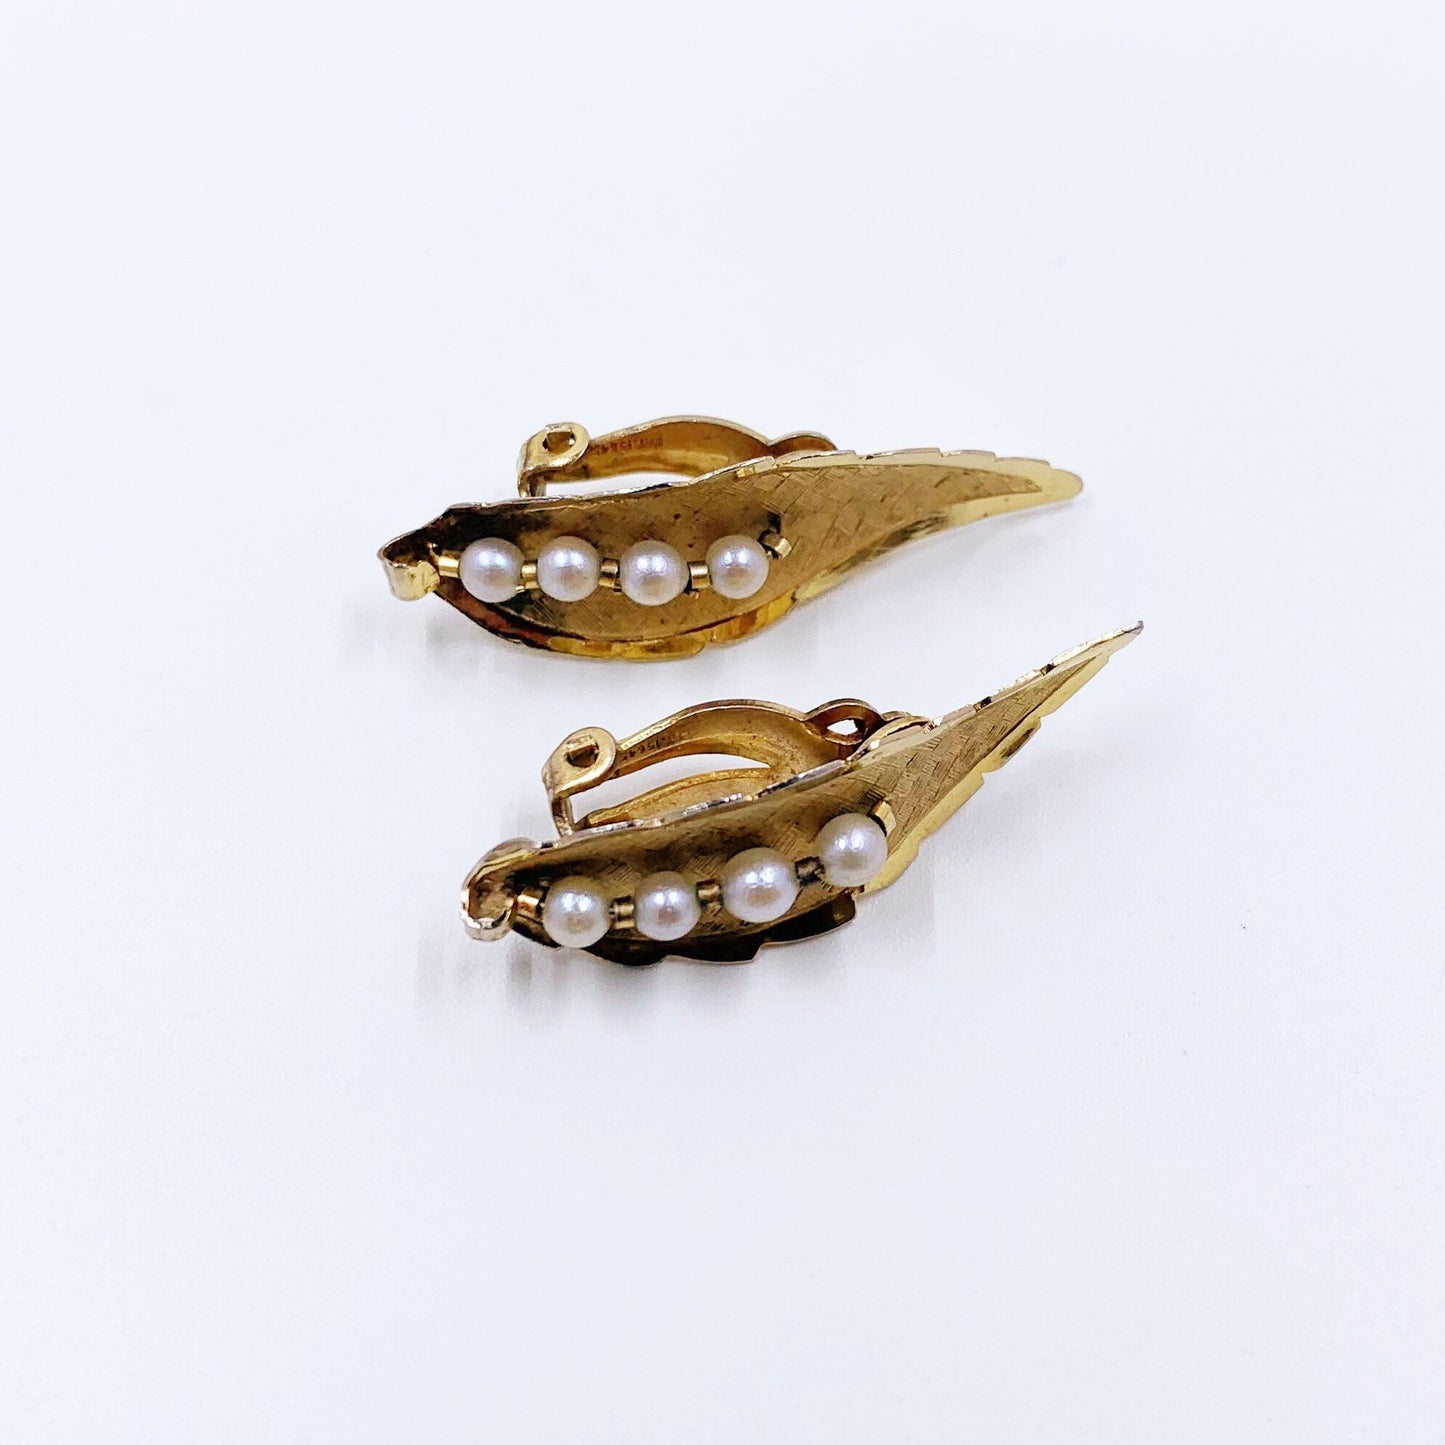 Vintage Gold Leaf and Pearl Earrings | Gold Filled Clip On | Imperial Pearl Syndicate Earrings